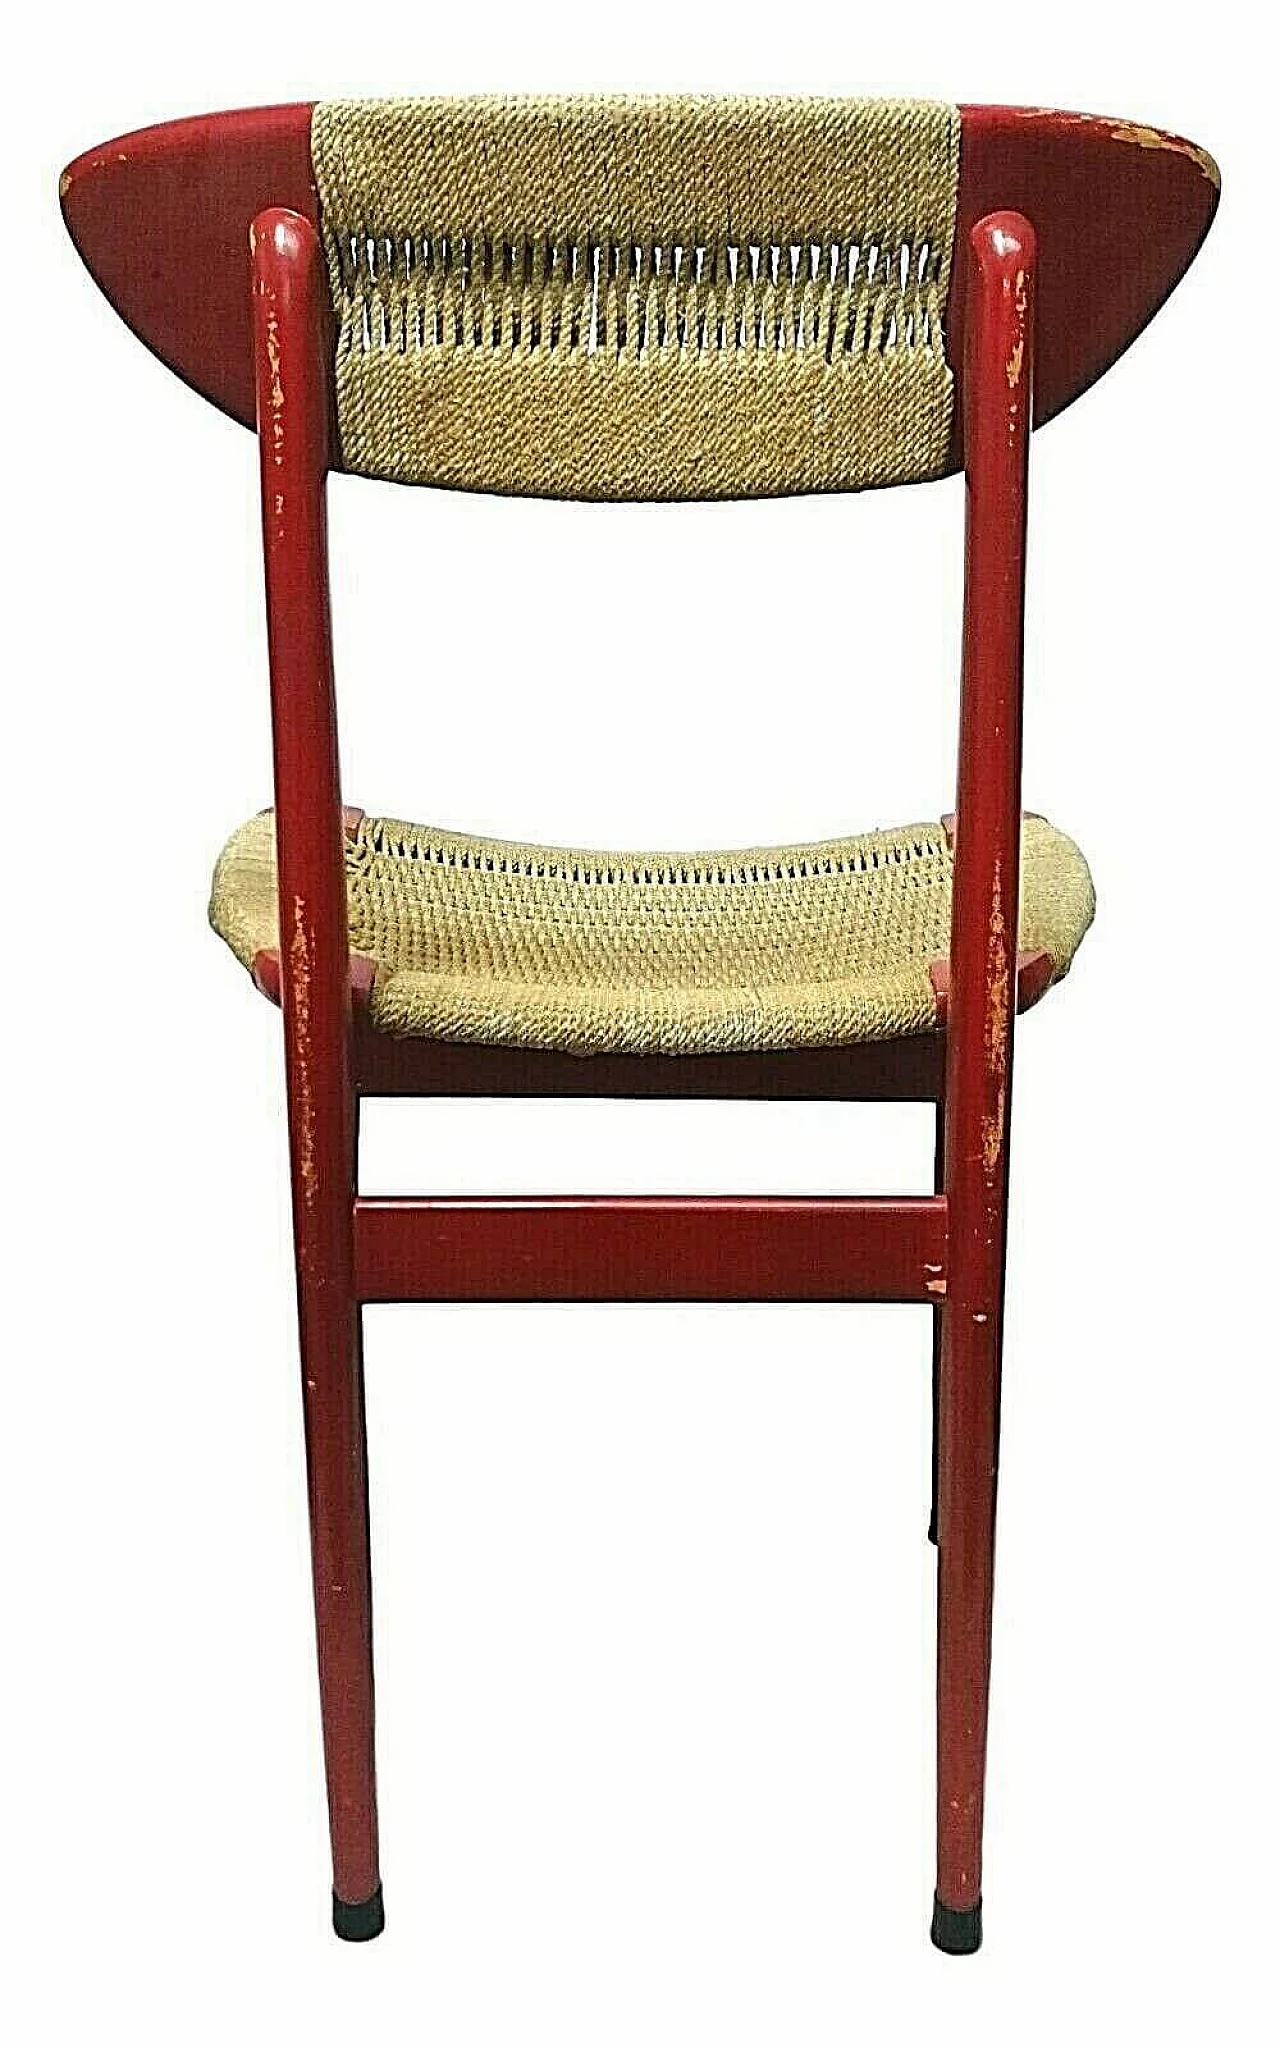 Wooden chair and rope by Hans Wegner, 1950s 1165624